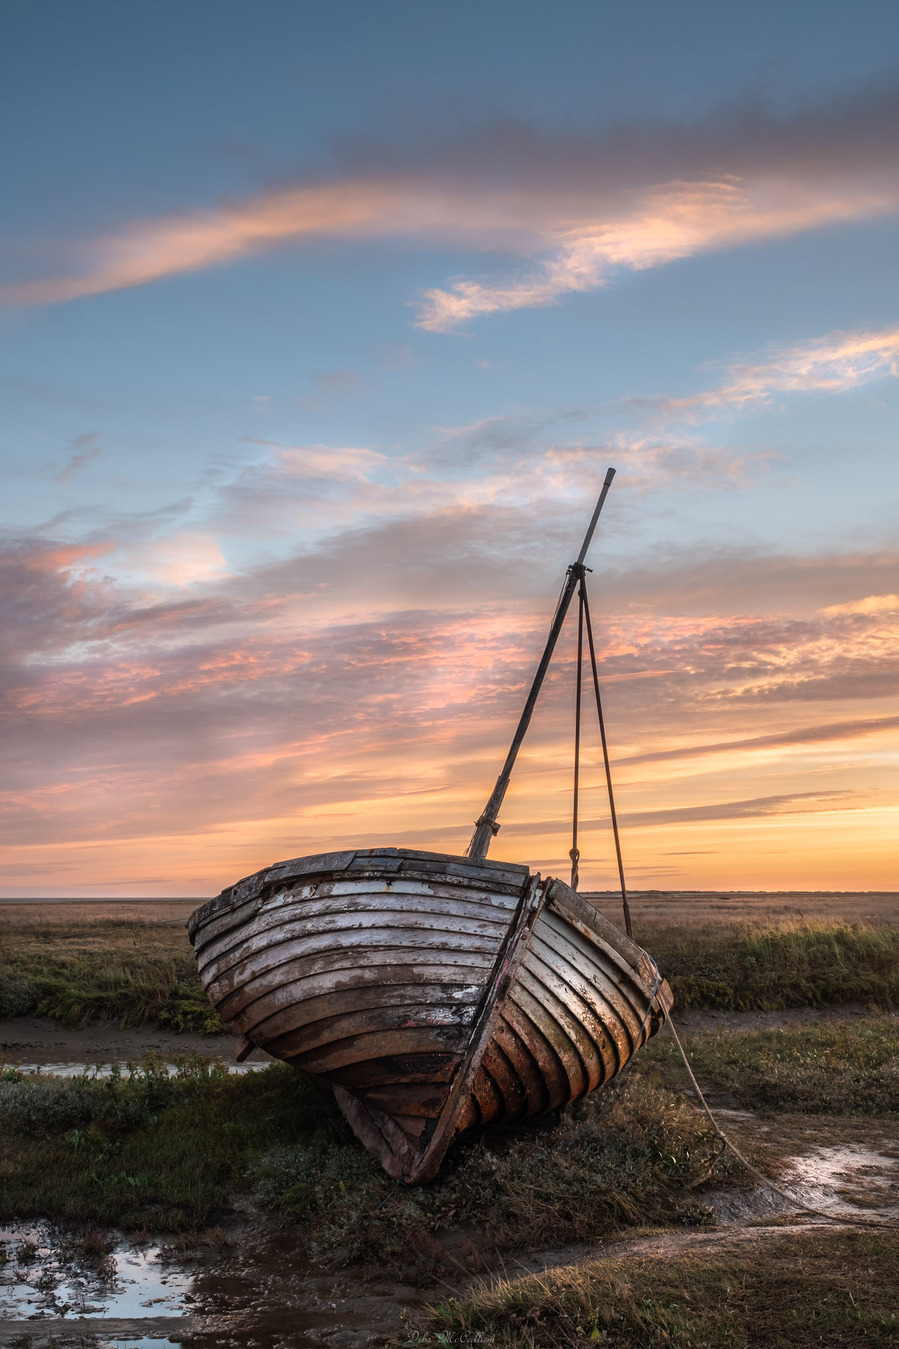 decaying white sailboat with peeling paint with a red sky and clouds at sunset on the Norfolk coast